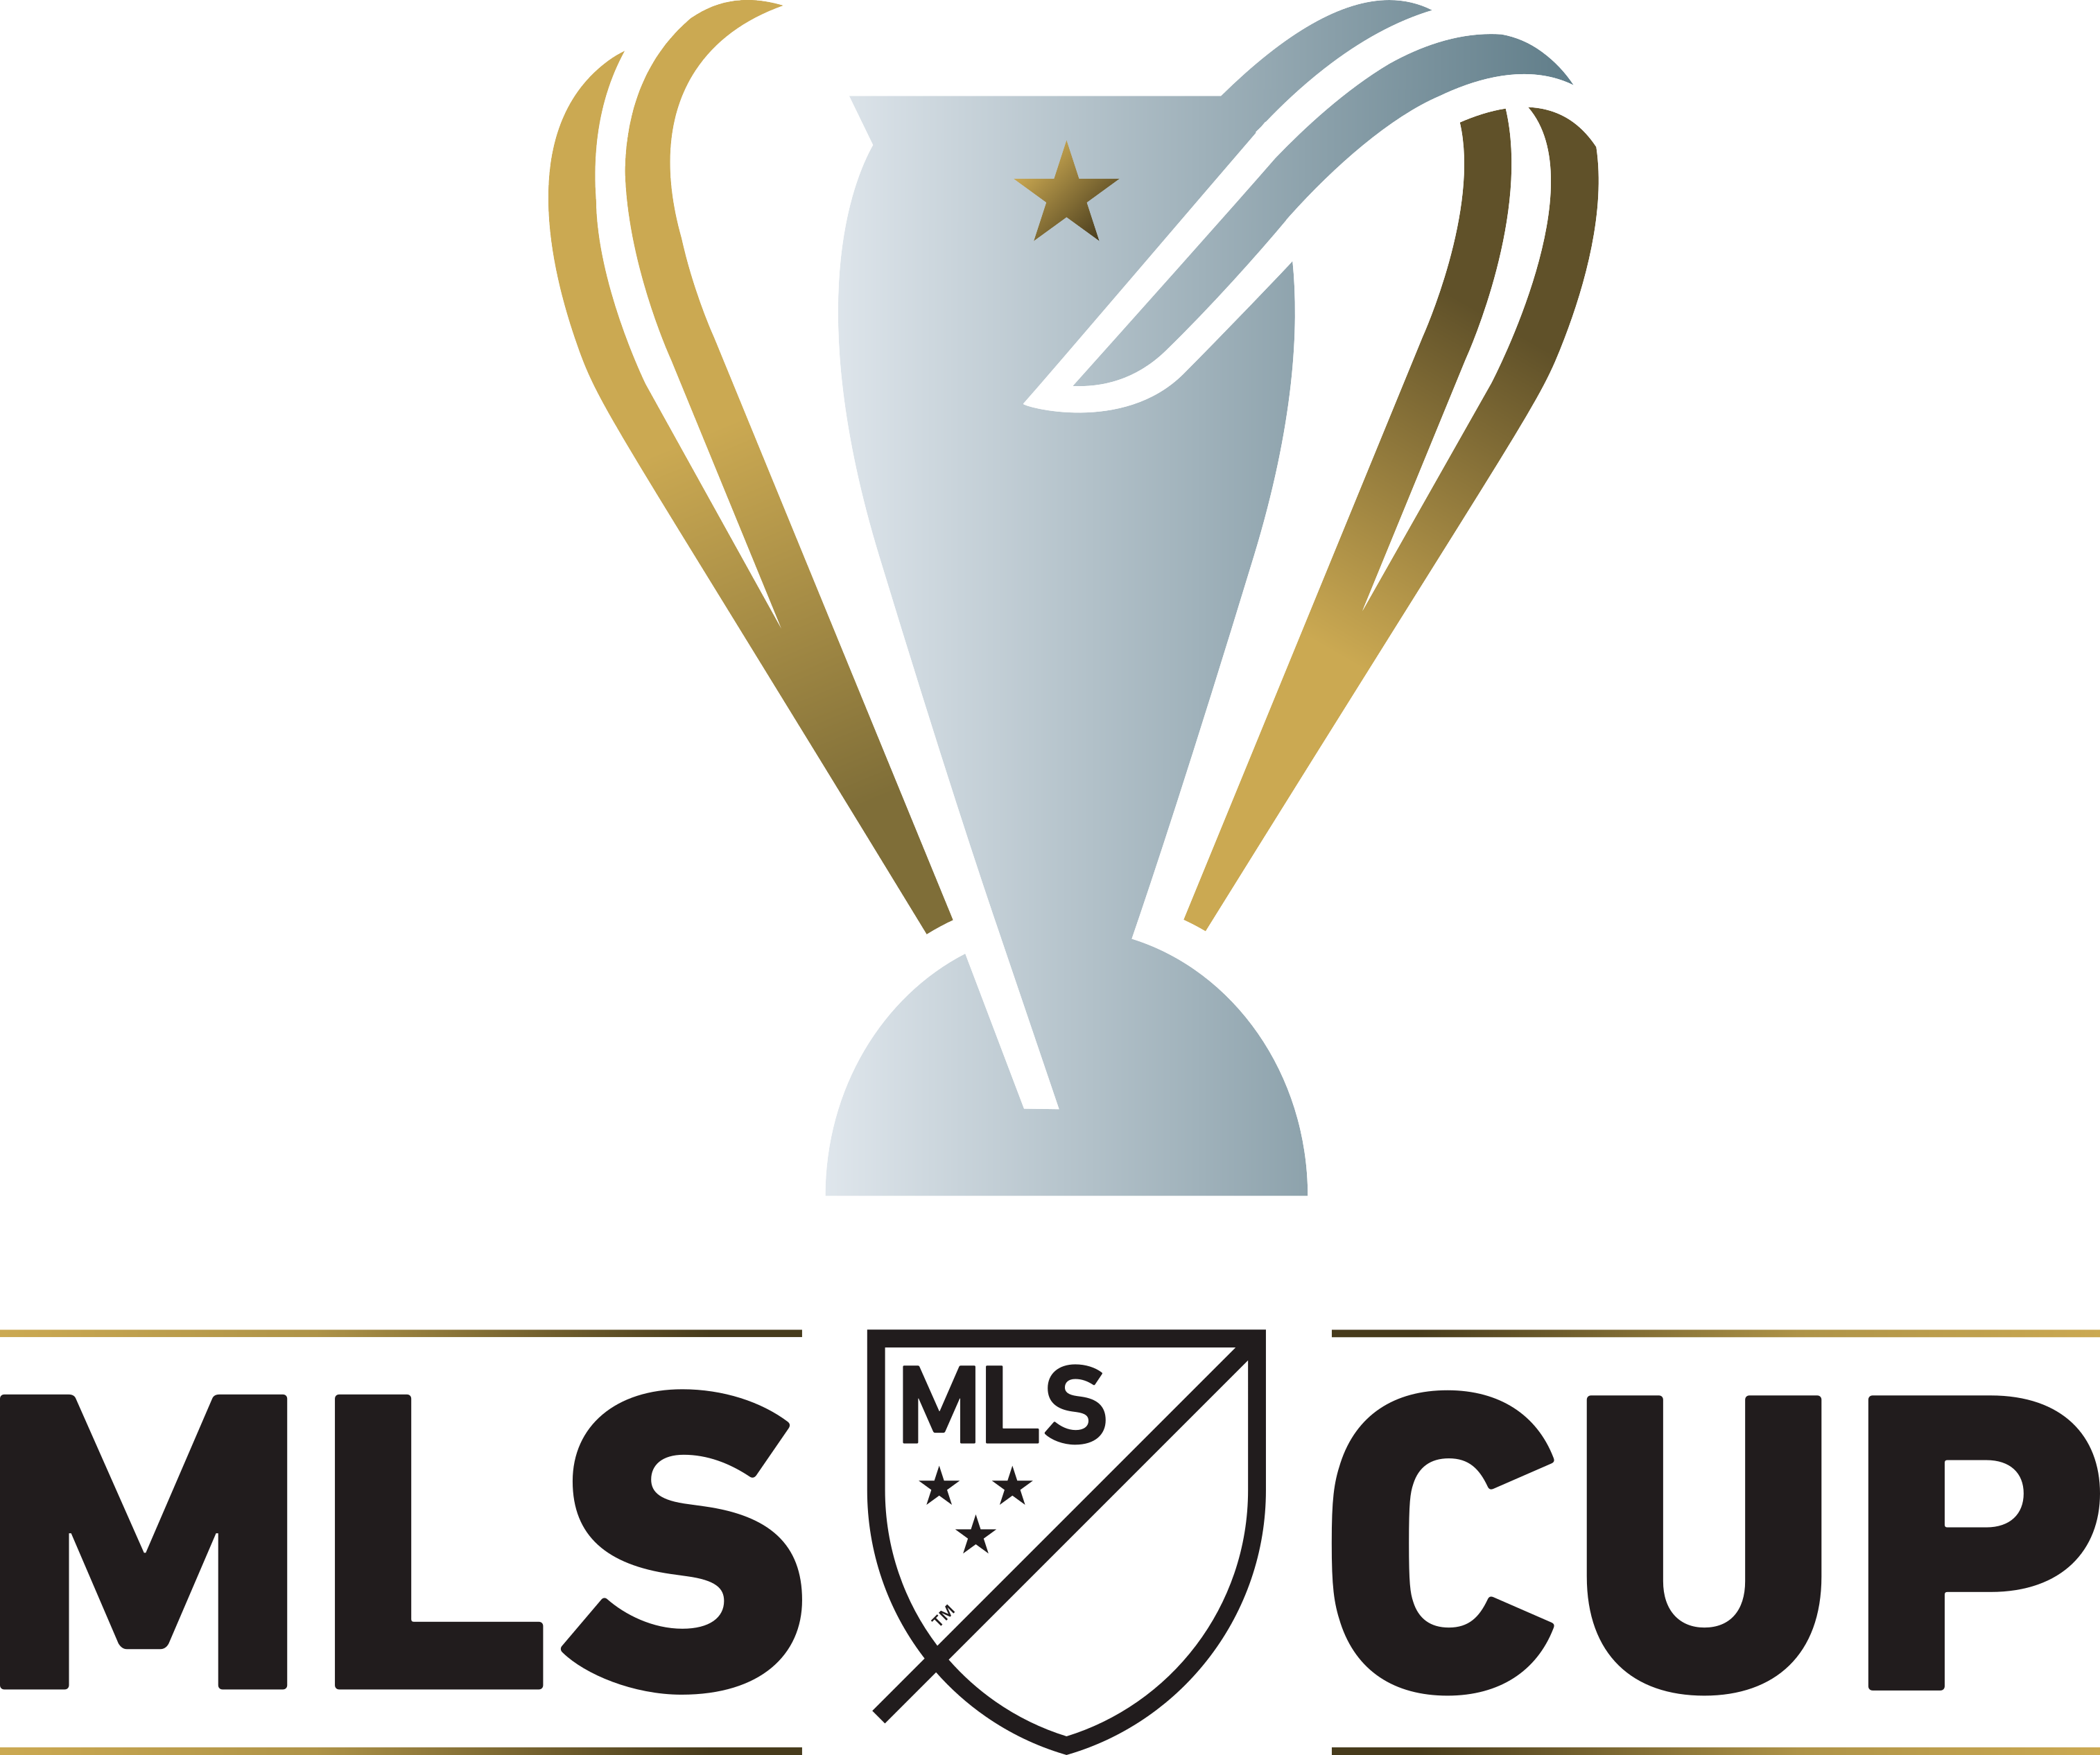 MLS Cup NPI's Cascadia Advocate